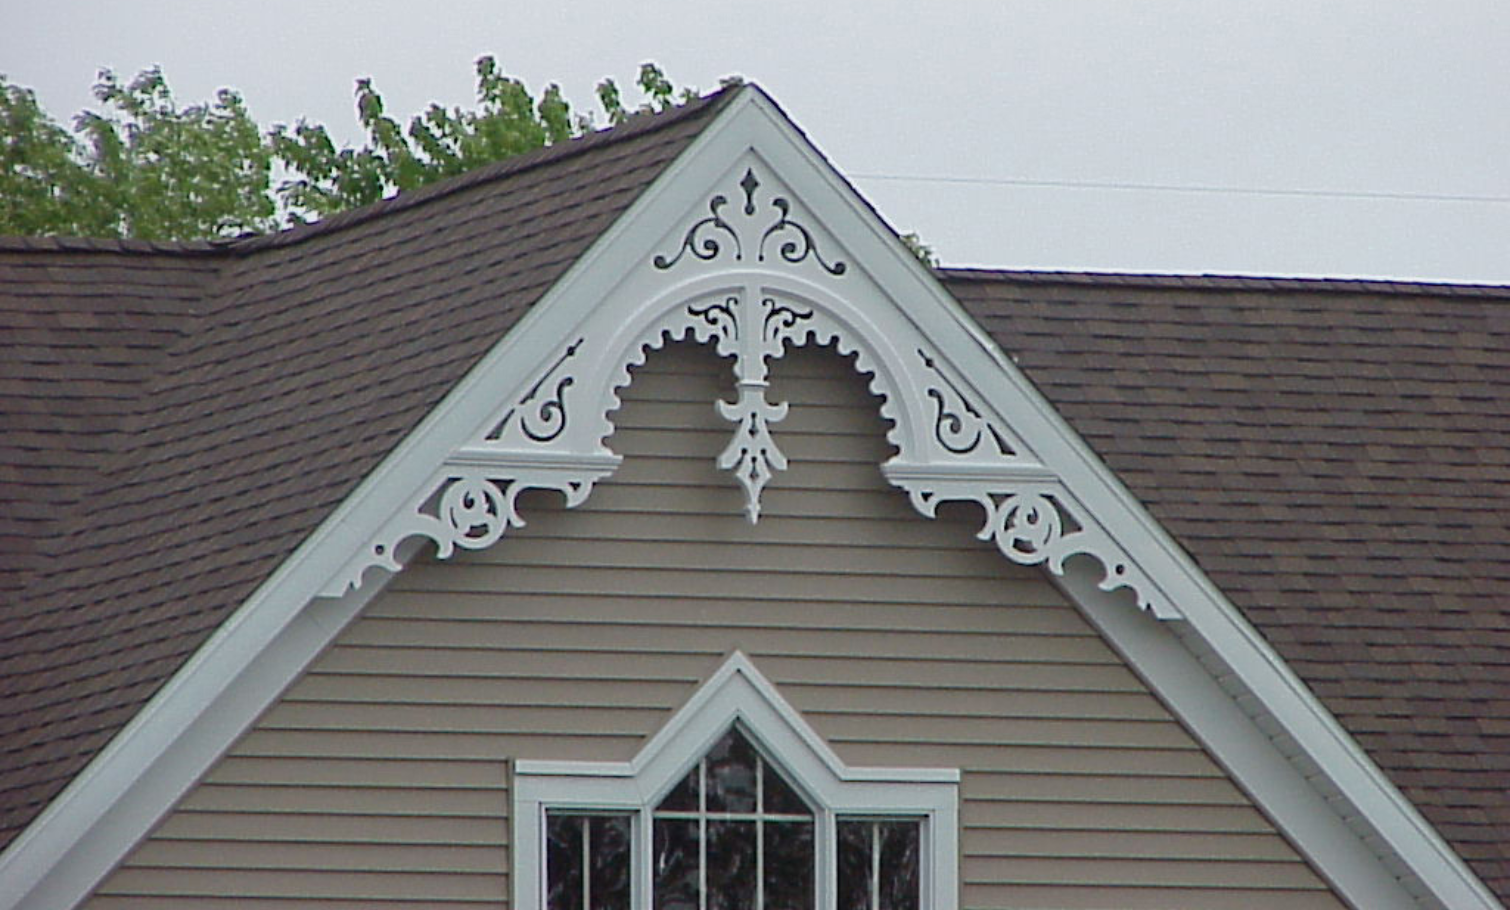 This tan-sided home has white trim and a white, Victorian-style PVC gable decoration